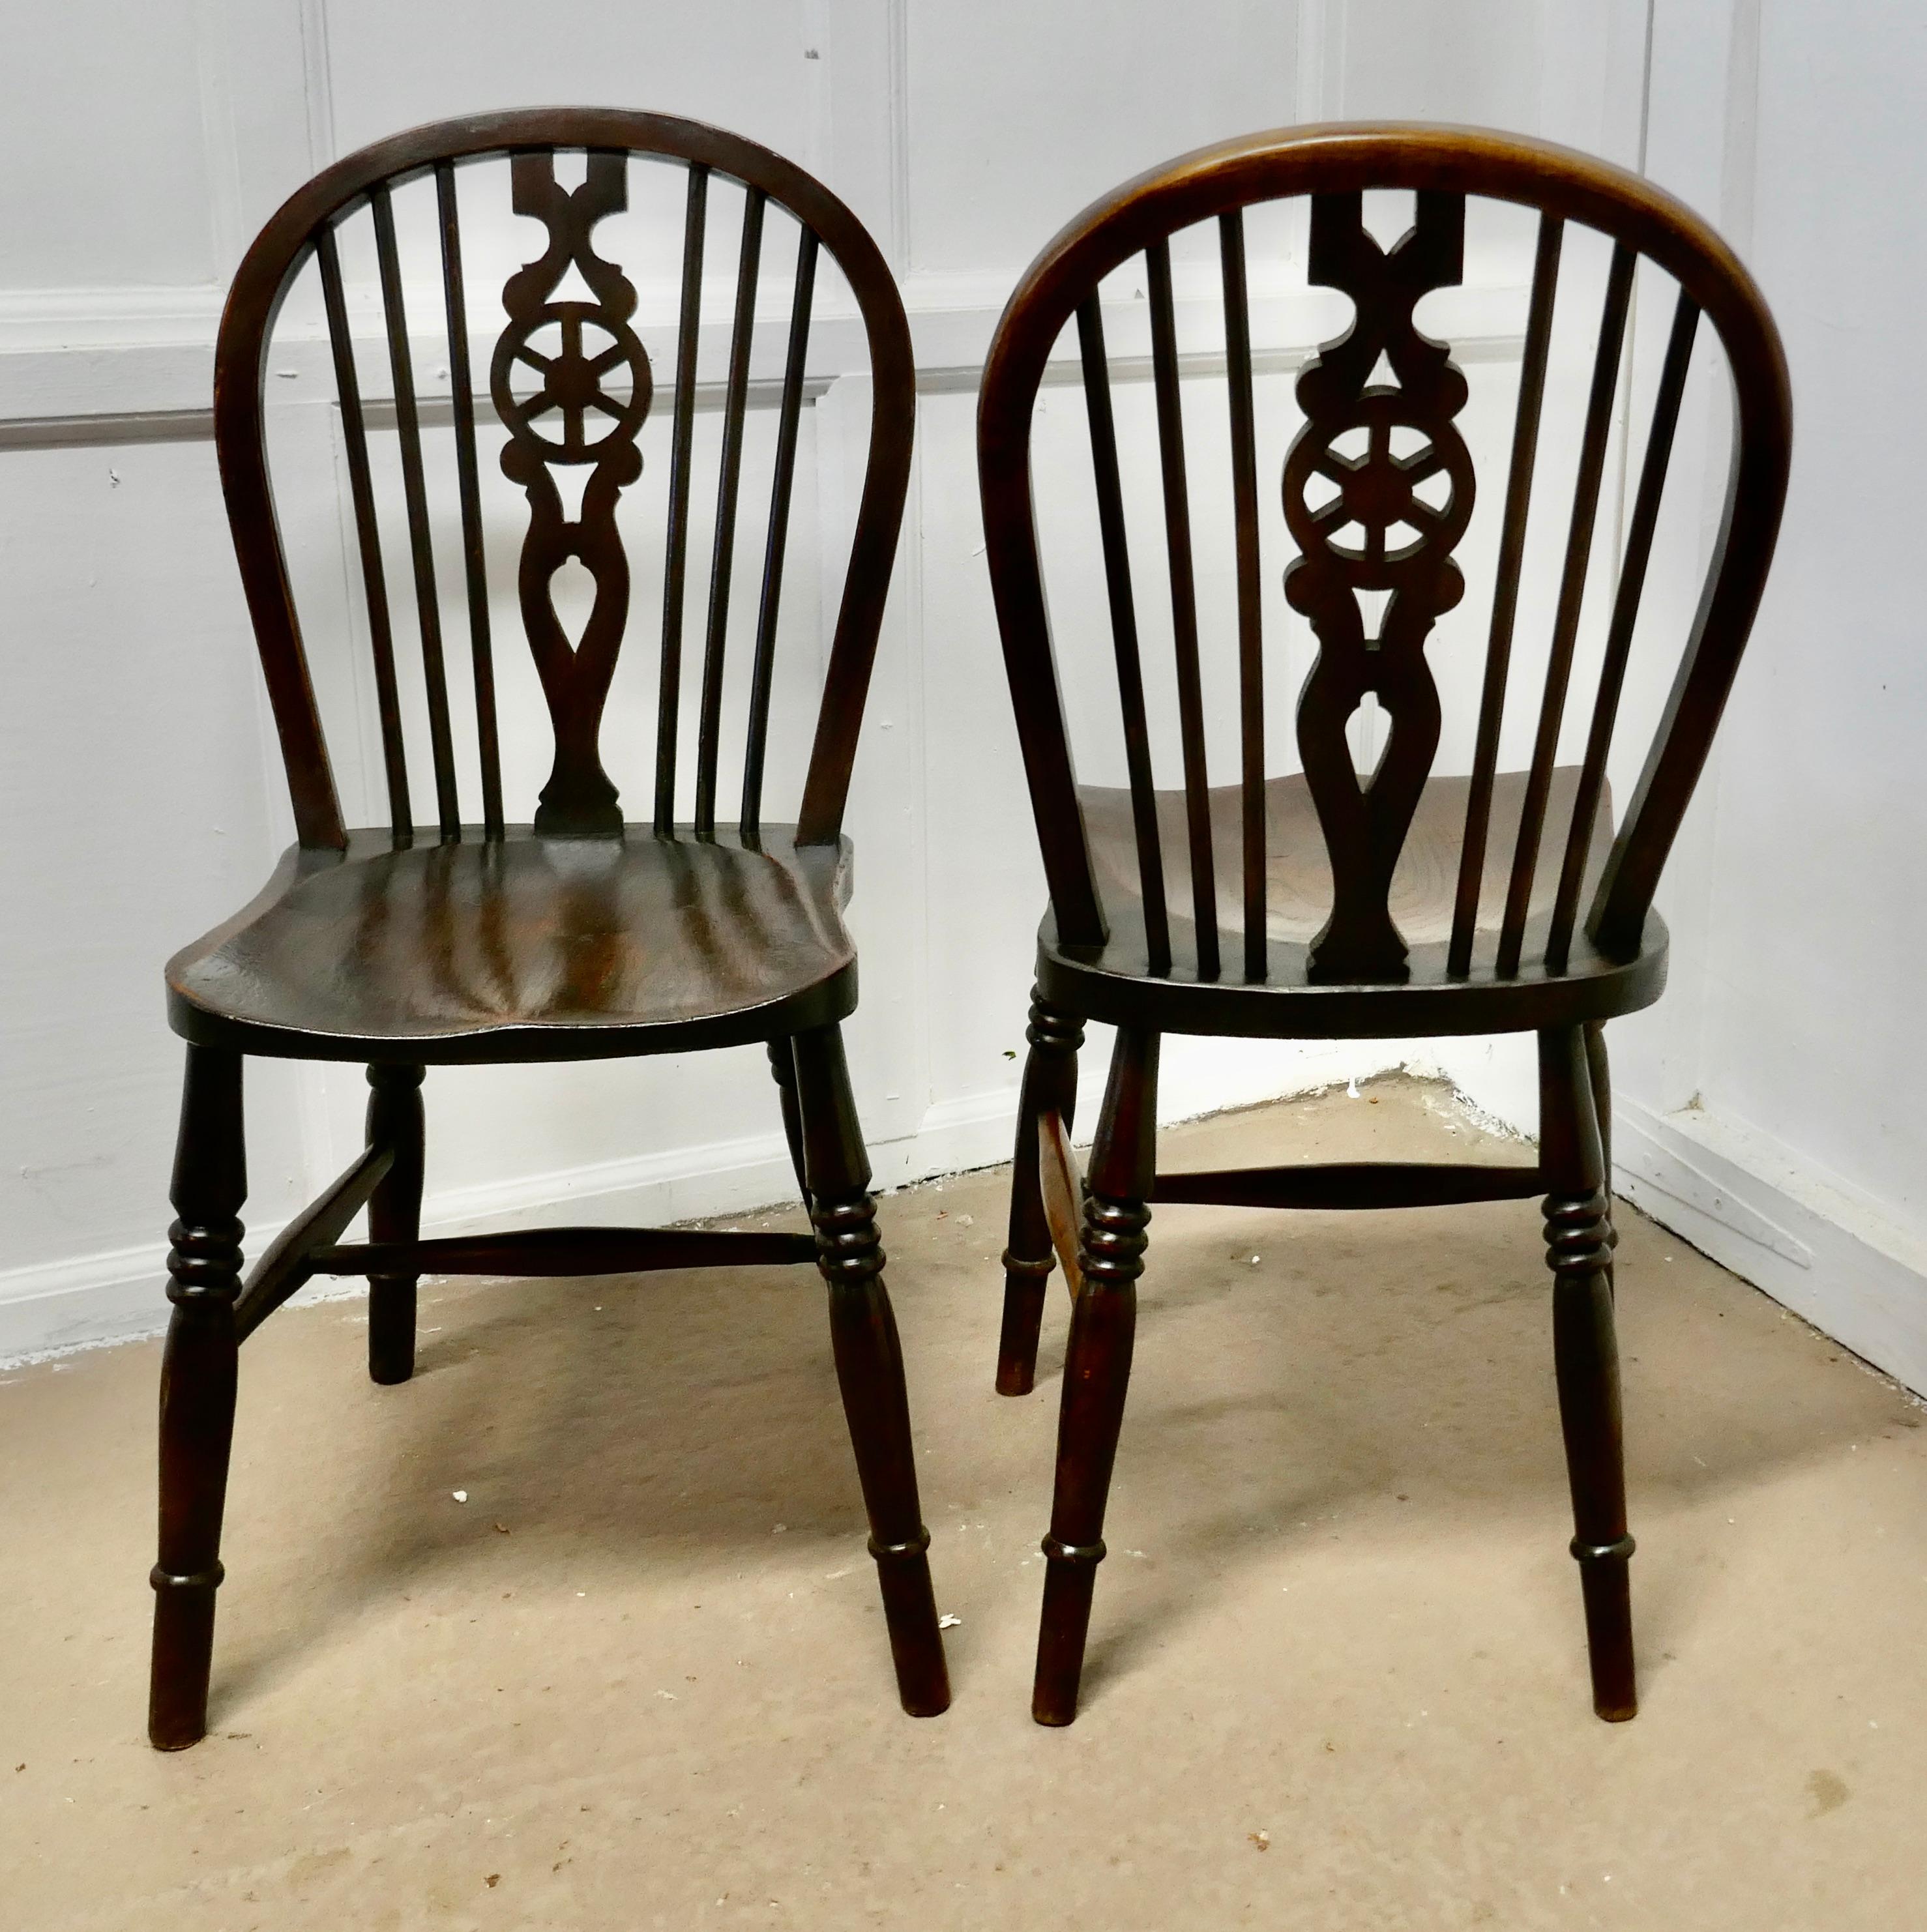 A pair of Victorian beech and elm wheel back chairs


The chairs are a Classic design and traditionally made from solid wood they have hooped backs in the traditional Windsor style with spindles and a pierced centre splat in the shape of a wagon